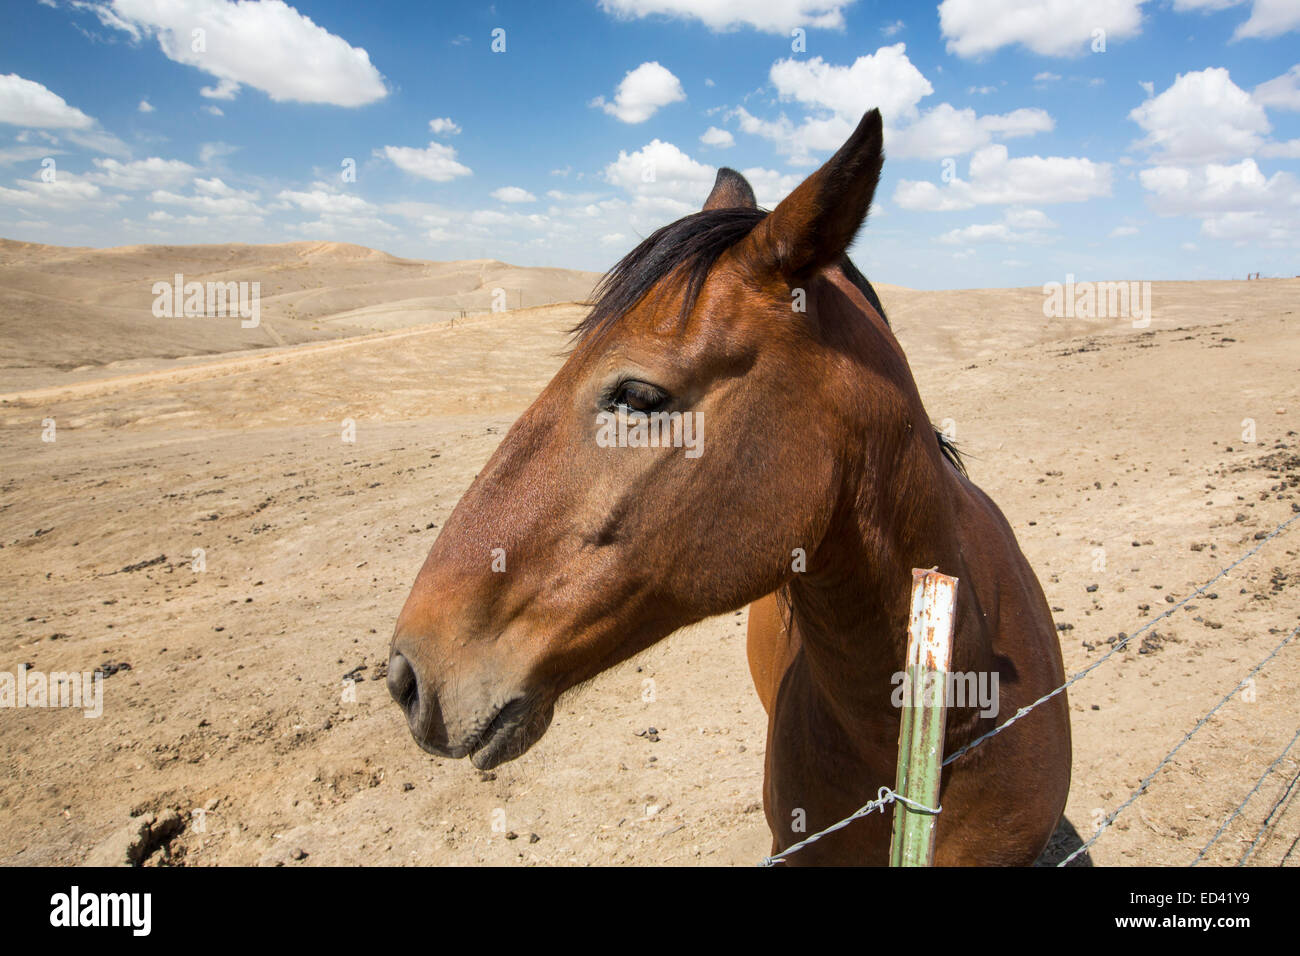 A horse in a drought parched landscape in Bakersfield, California, USA. following the four year long drought, Bakersfield is now the driest city in the USA. Stock Photo